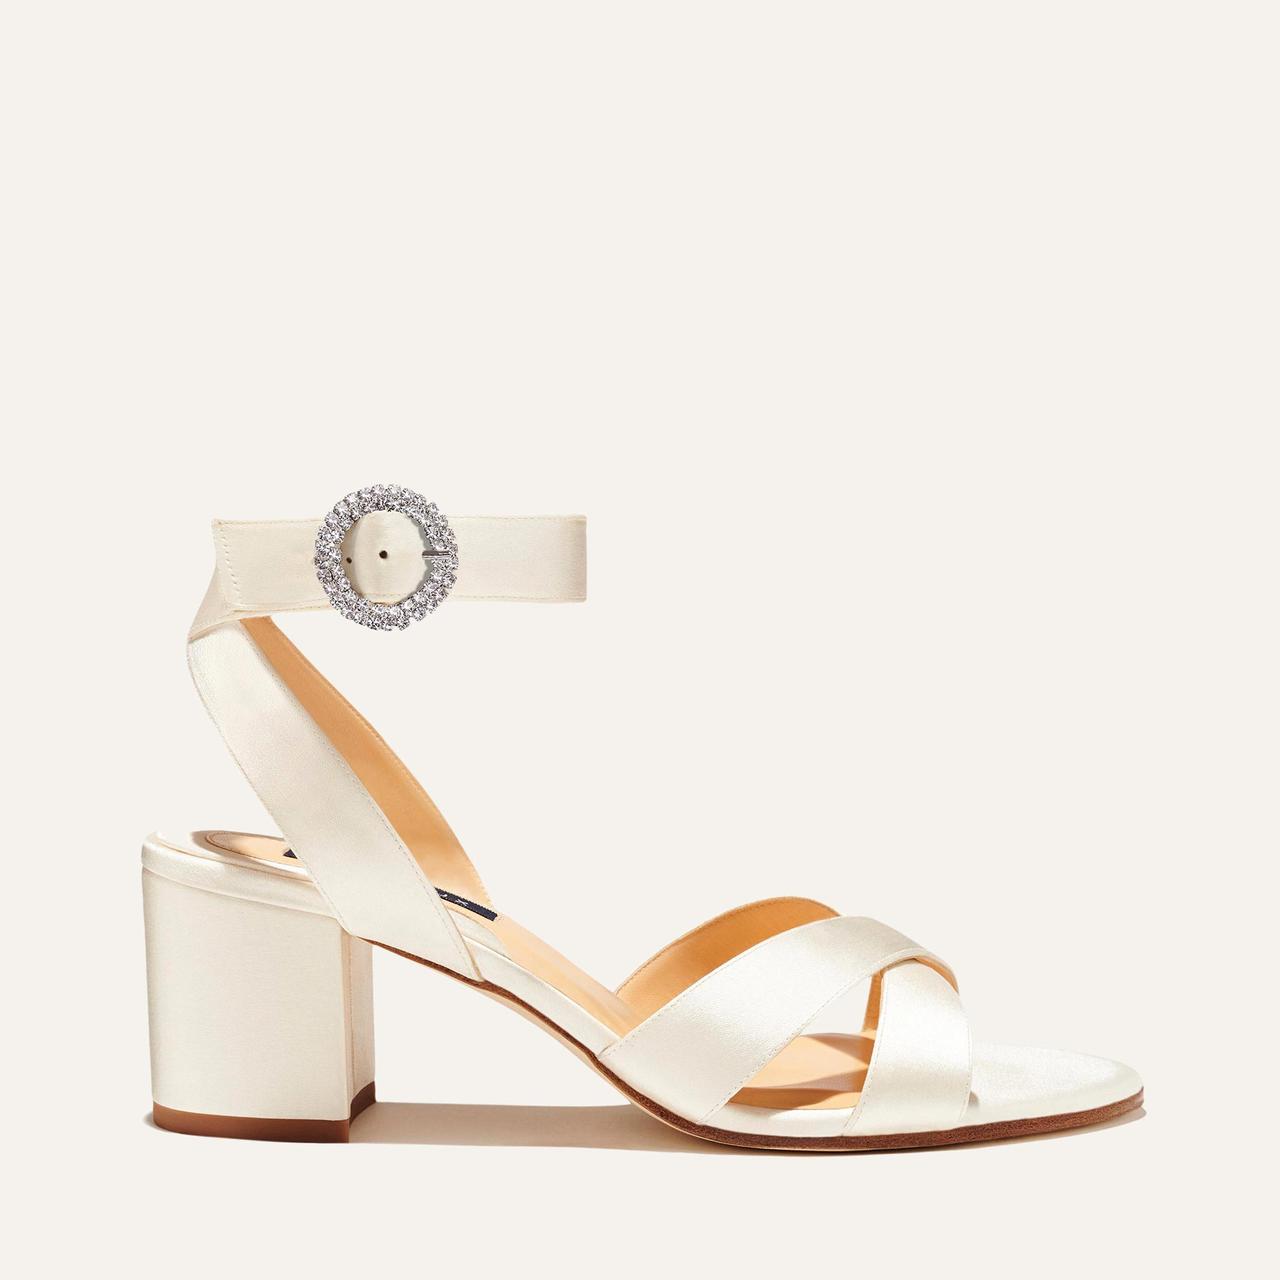 Wedding wedges and other comfortable bridal shoes – Easy Weddings